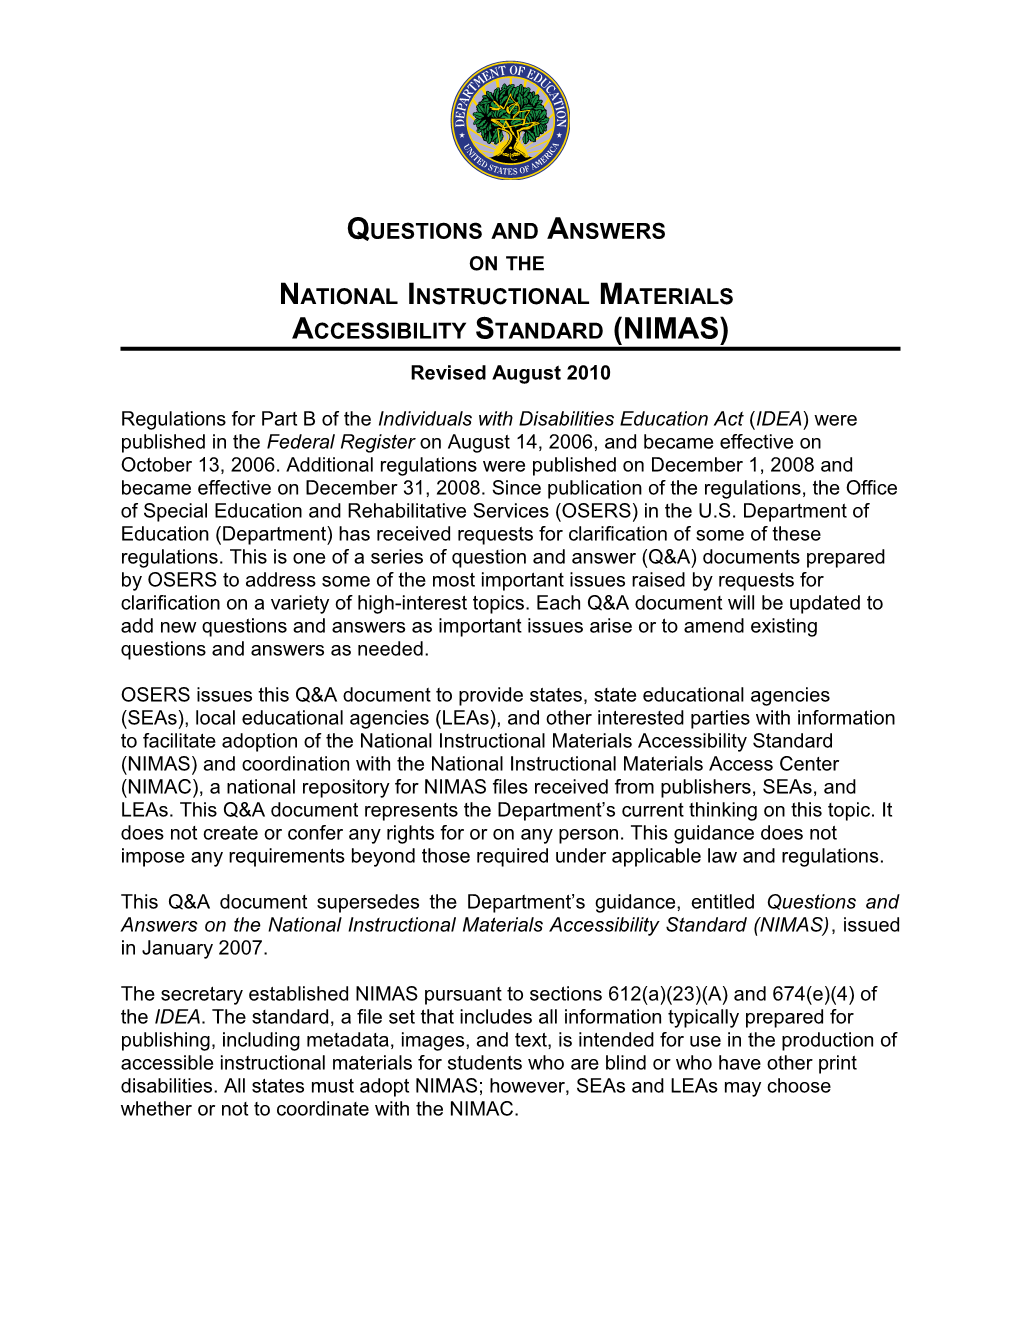 Questions and Answers on the National Instructional Materials Accessibility Standard (NIMAS)